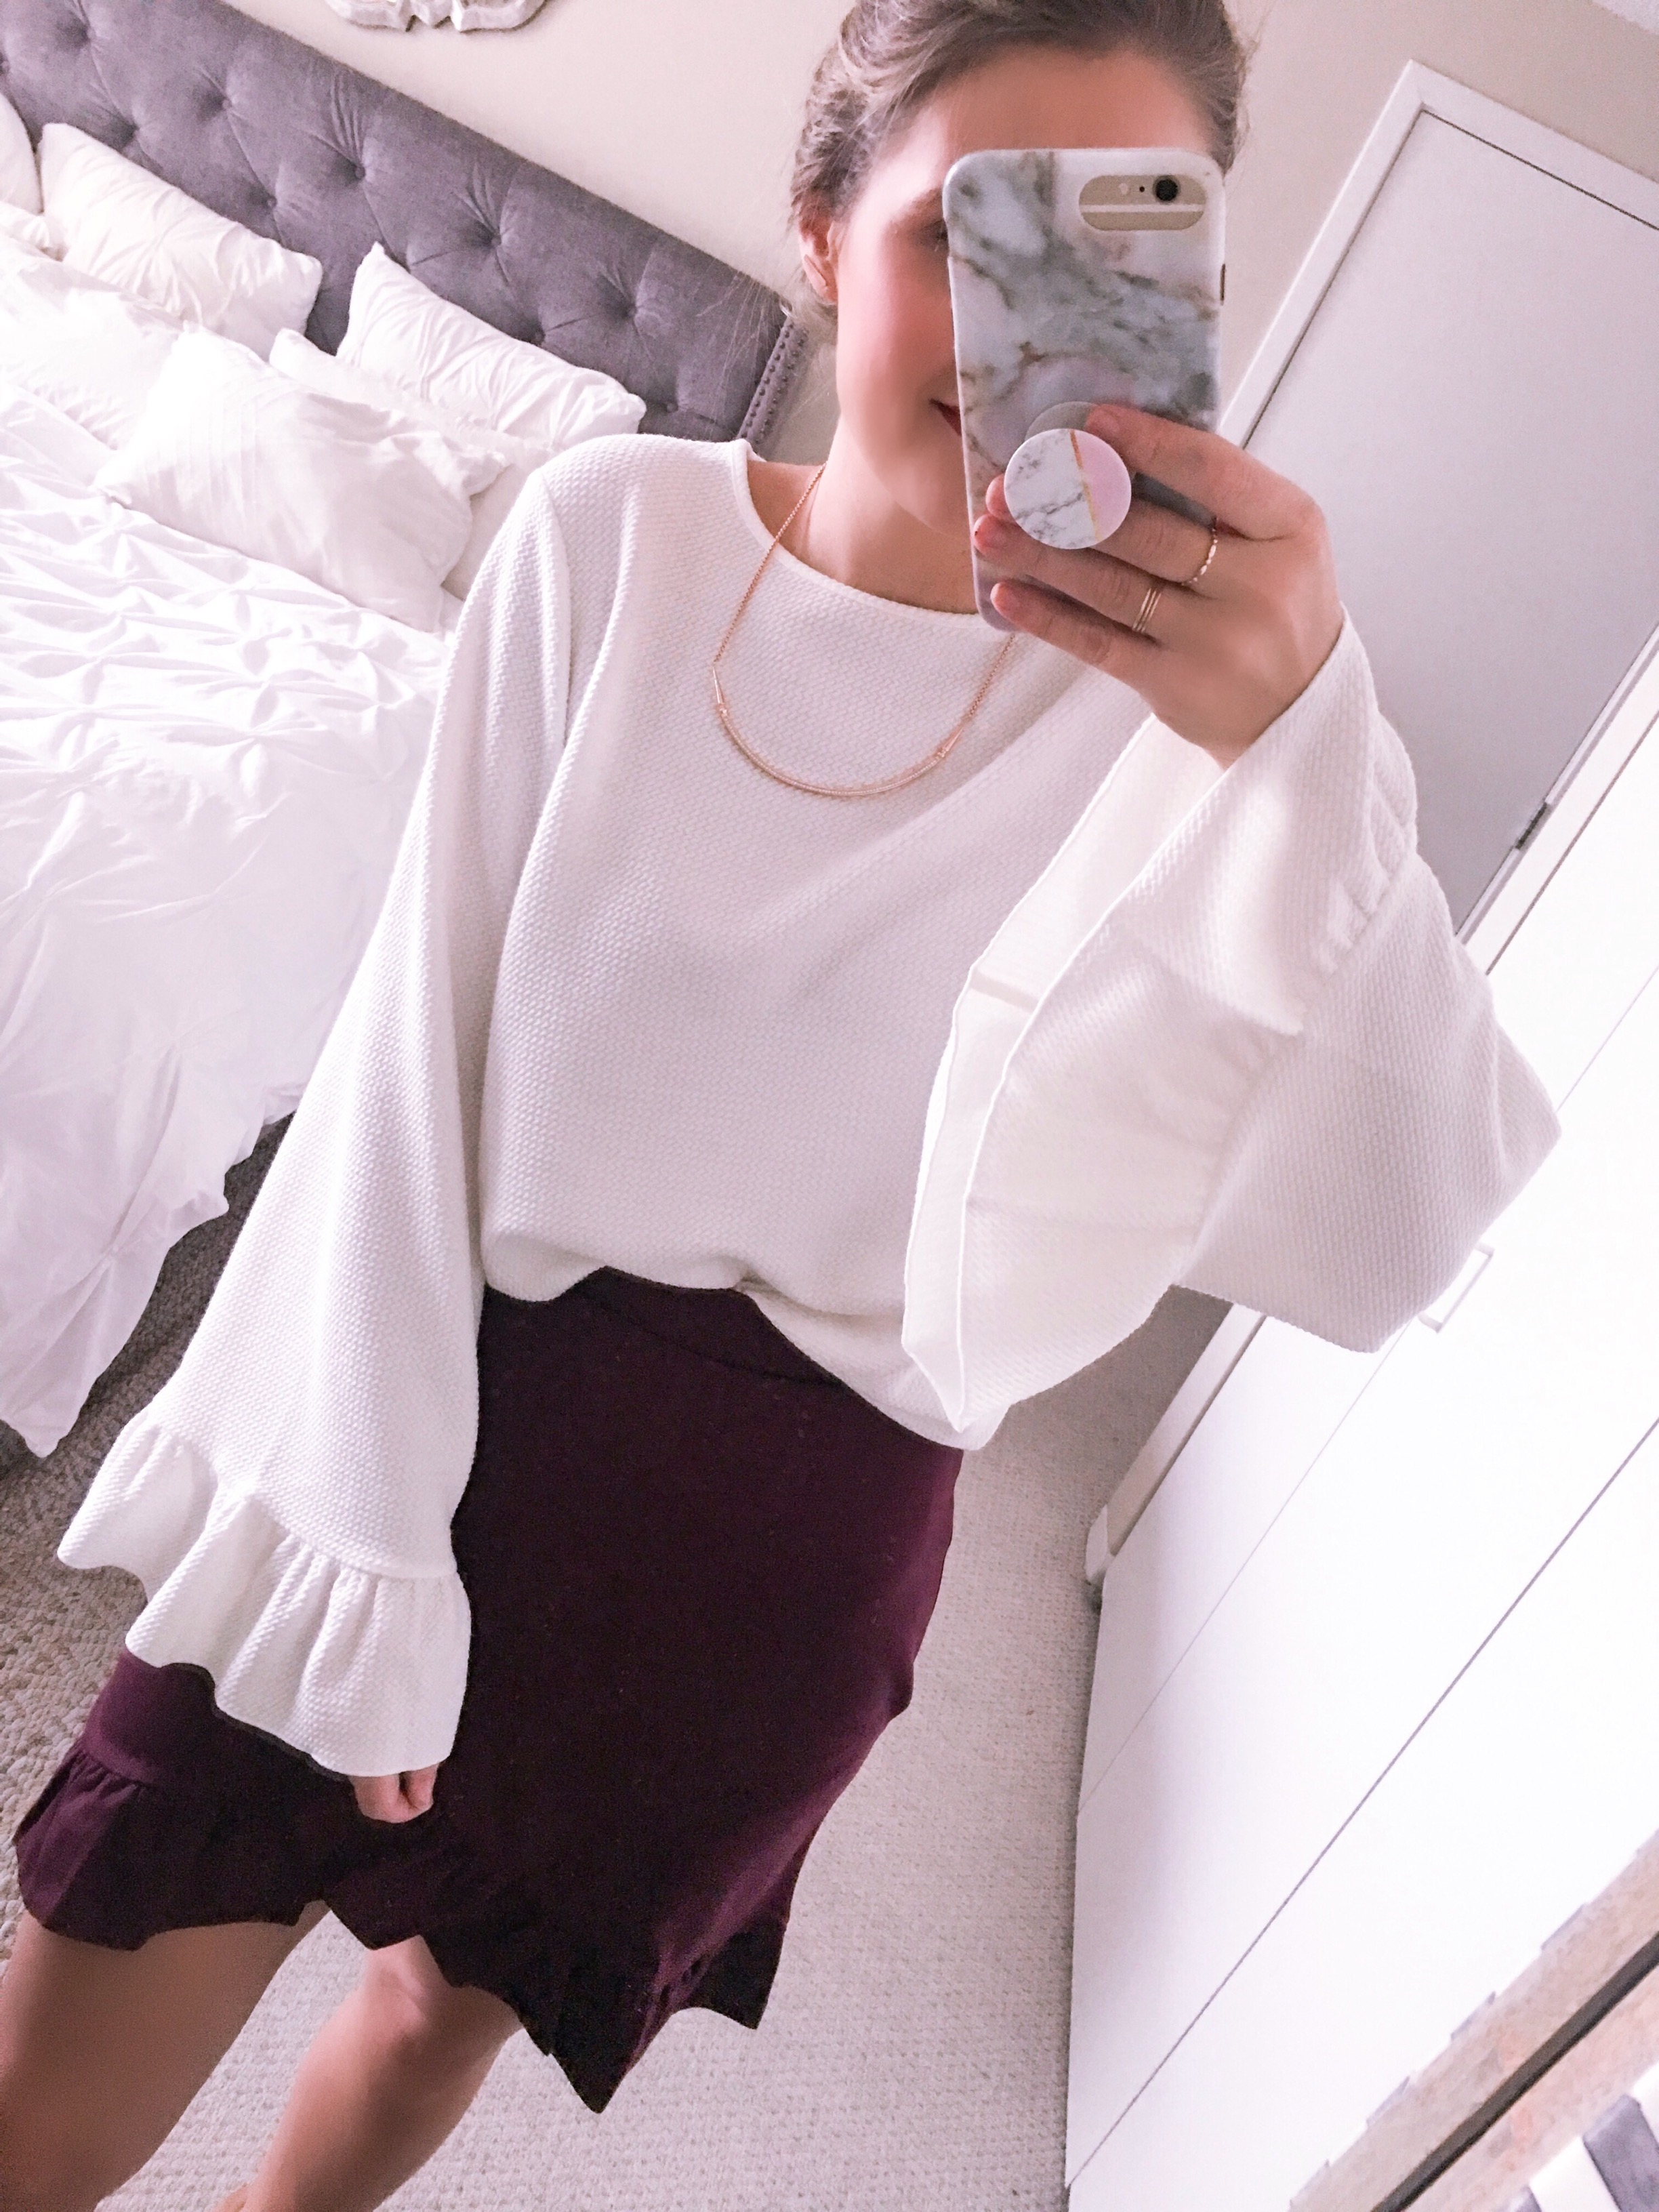 white bell sleeve top with a burgundy skirt - January Instagram Fashion Roundup (15 Outfits) by popular Chicago fashion blogger Visions of Vogue